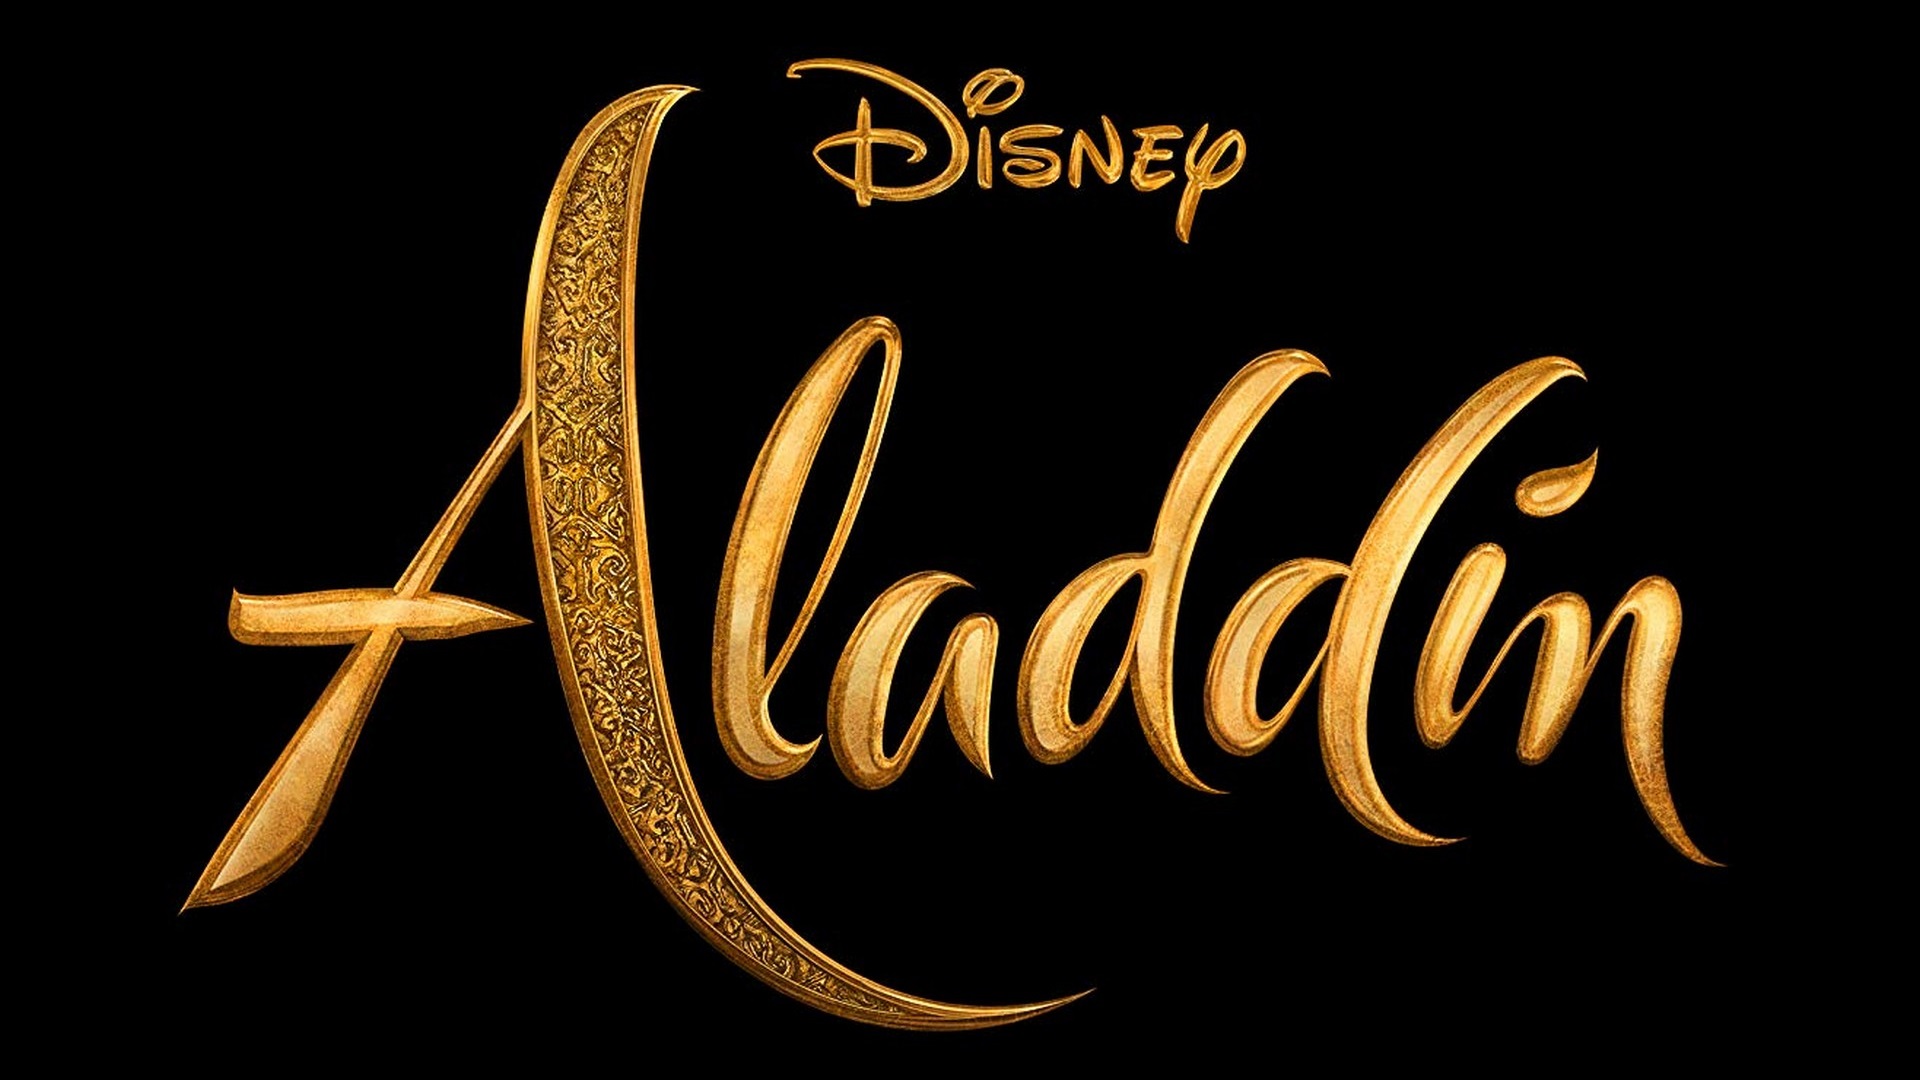 Aladdin Wallpaper HD with high-resolution 1920x1080 pixel. You can use this poster wallpaper for your Desktop Computers, Mac Screensavers, Windows Backgrounds, iPhone Wallpapers, Tablet or Android Lock screen and another Mobile device